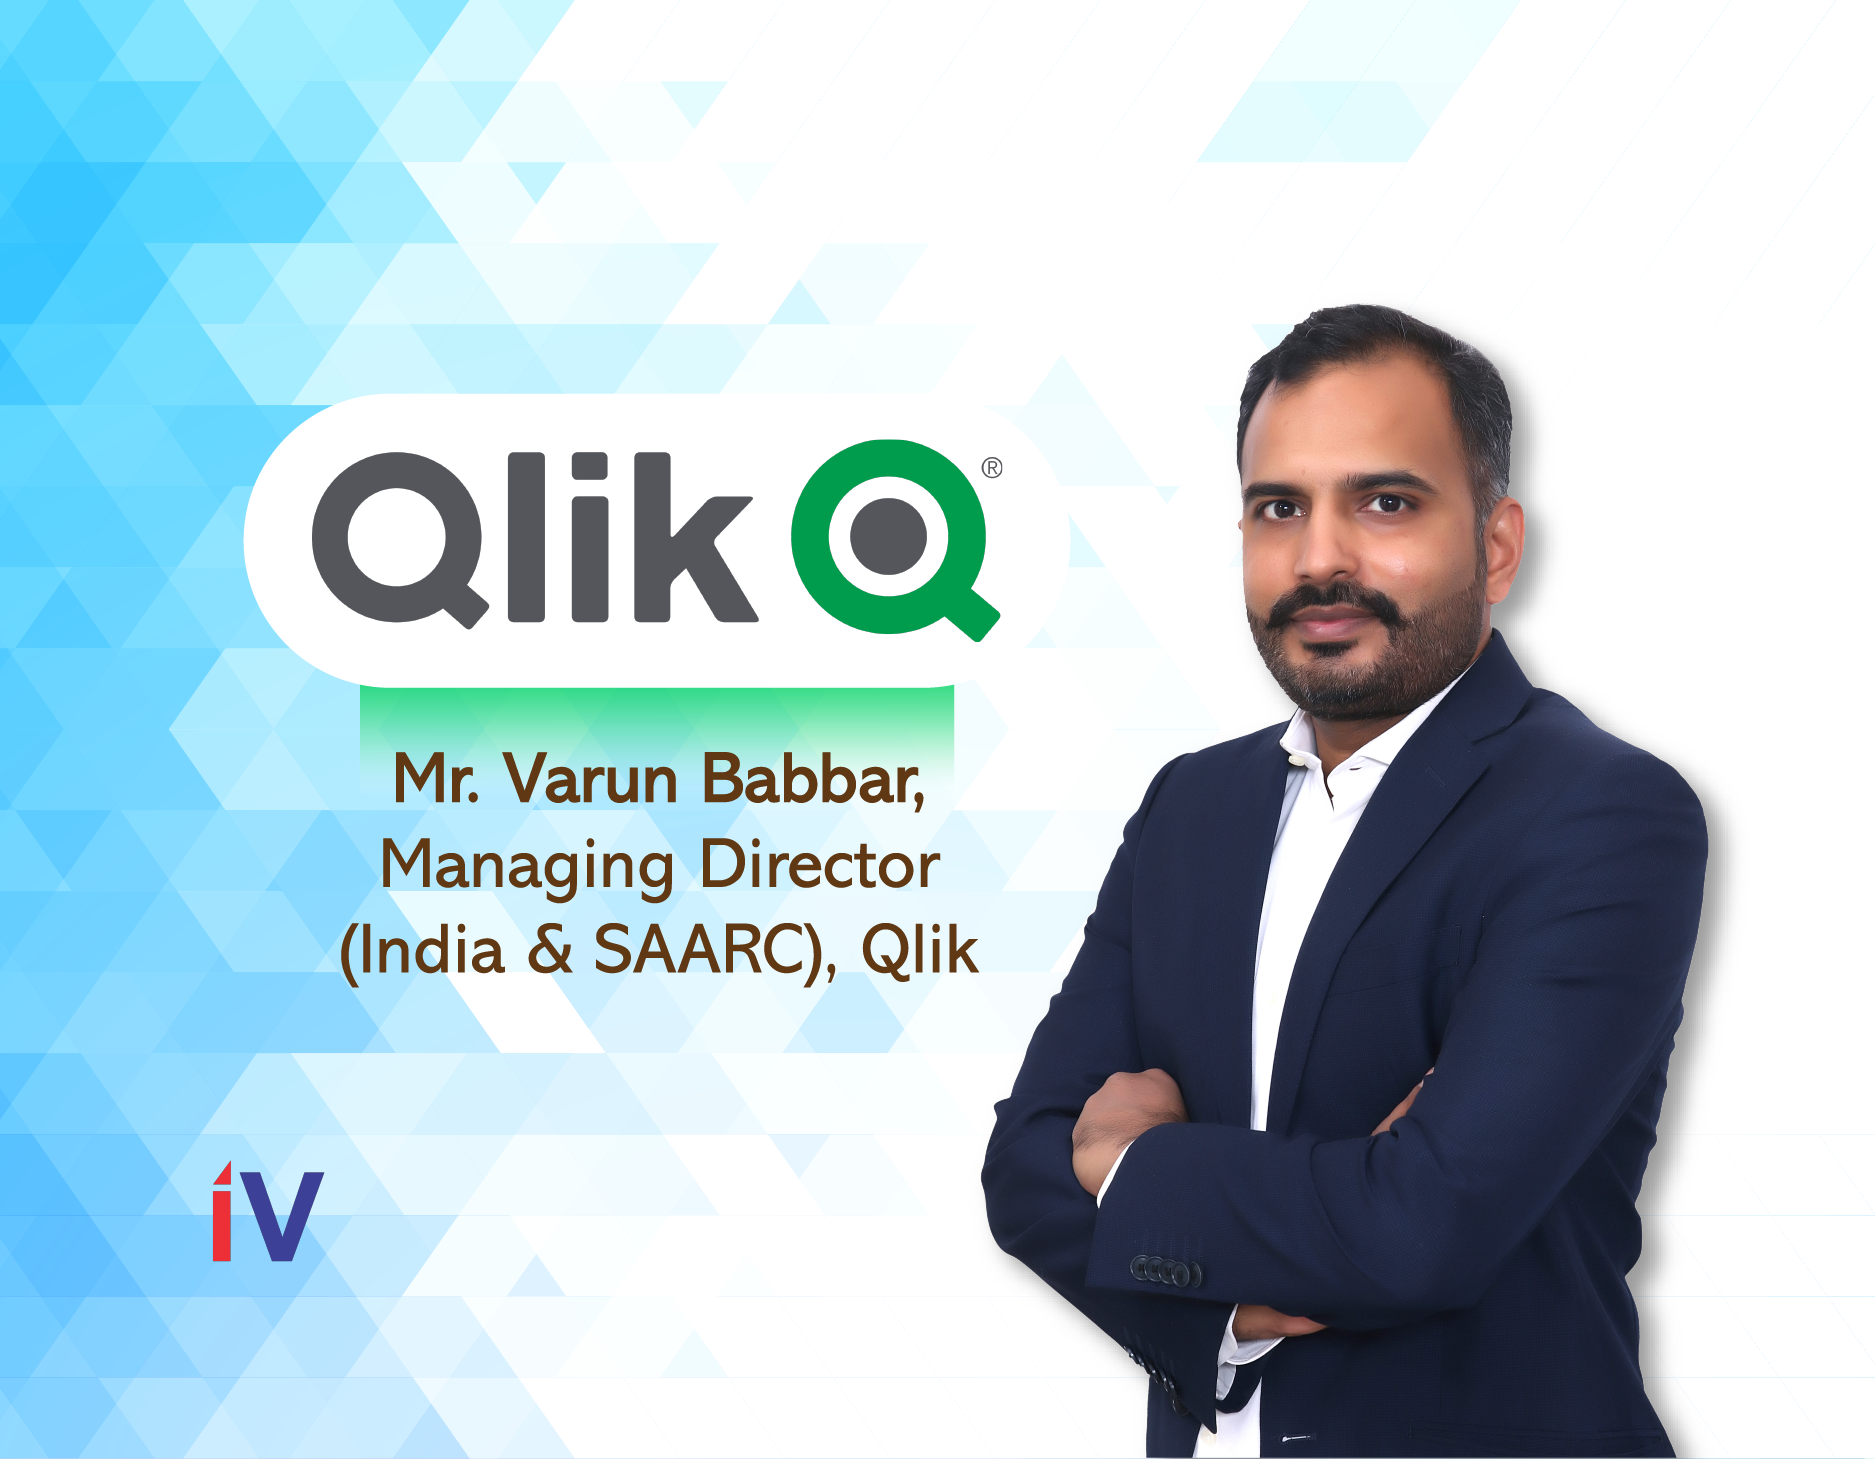 "Qlik has over 800 plus customers in India in different domains, starting from the public sector, banking, financial Services, and IT sector, huge presence here. "